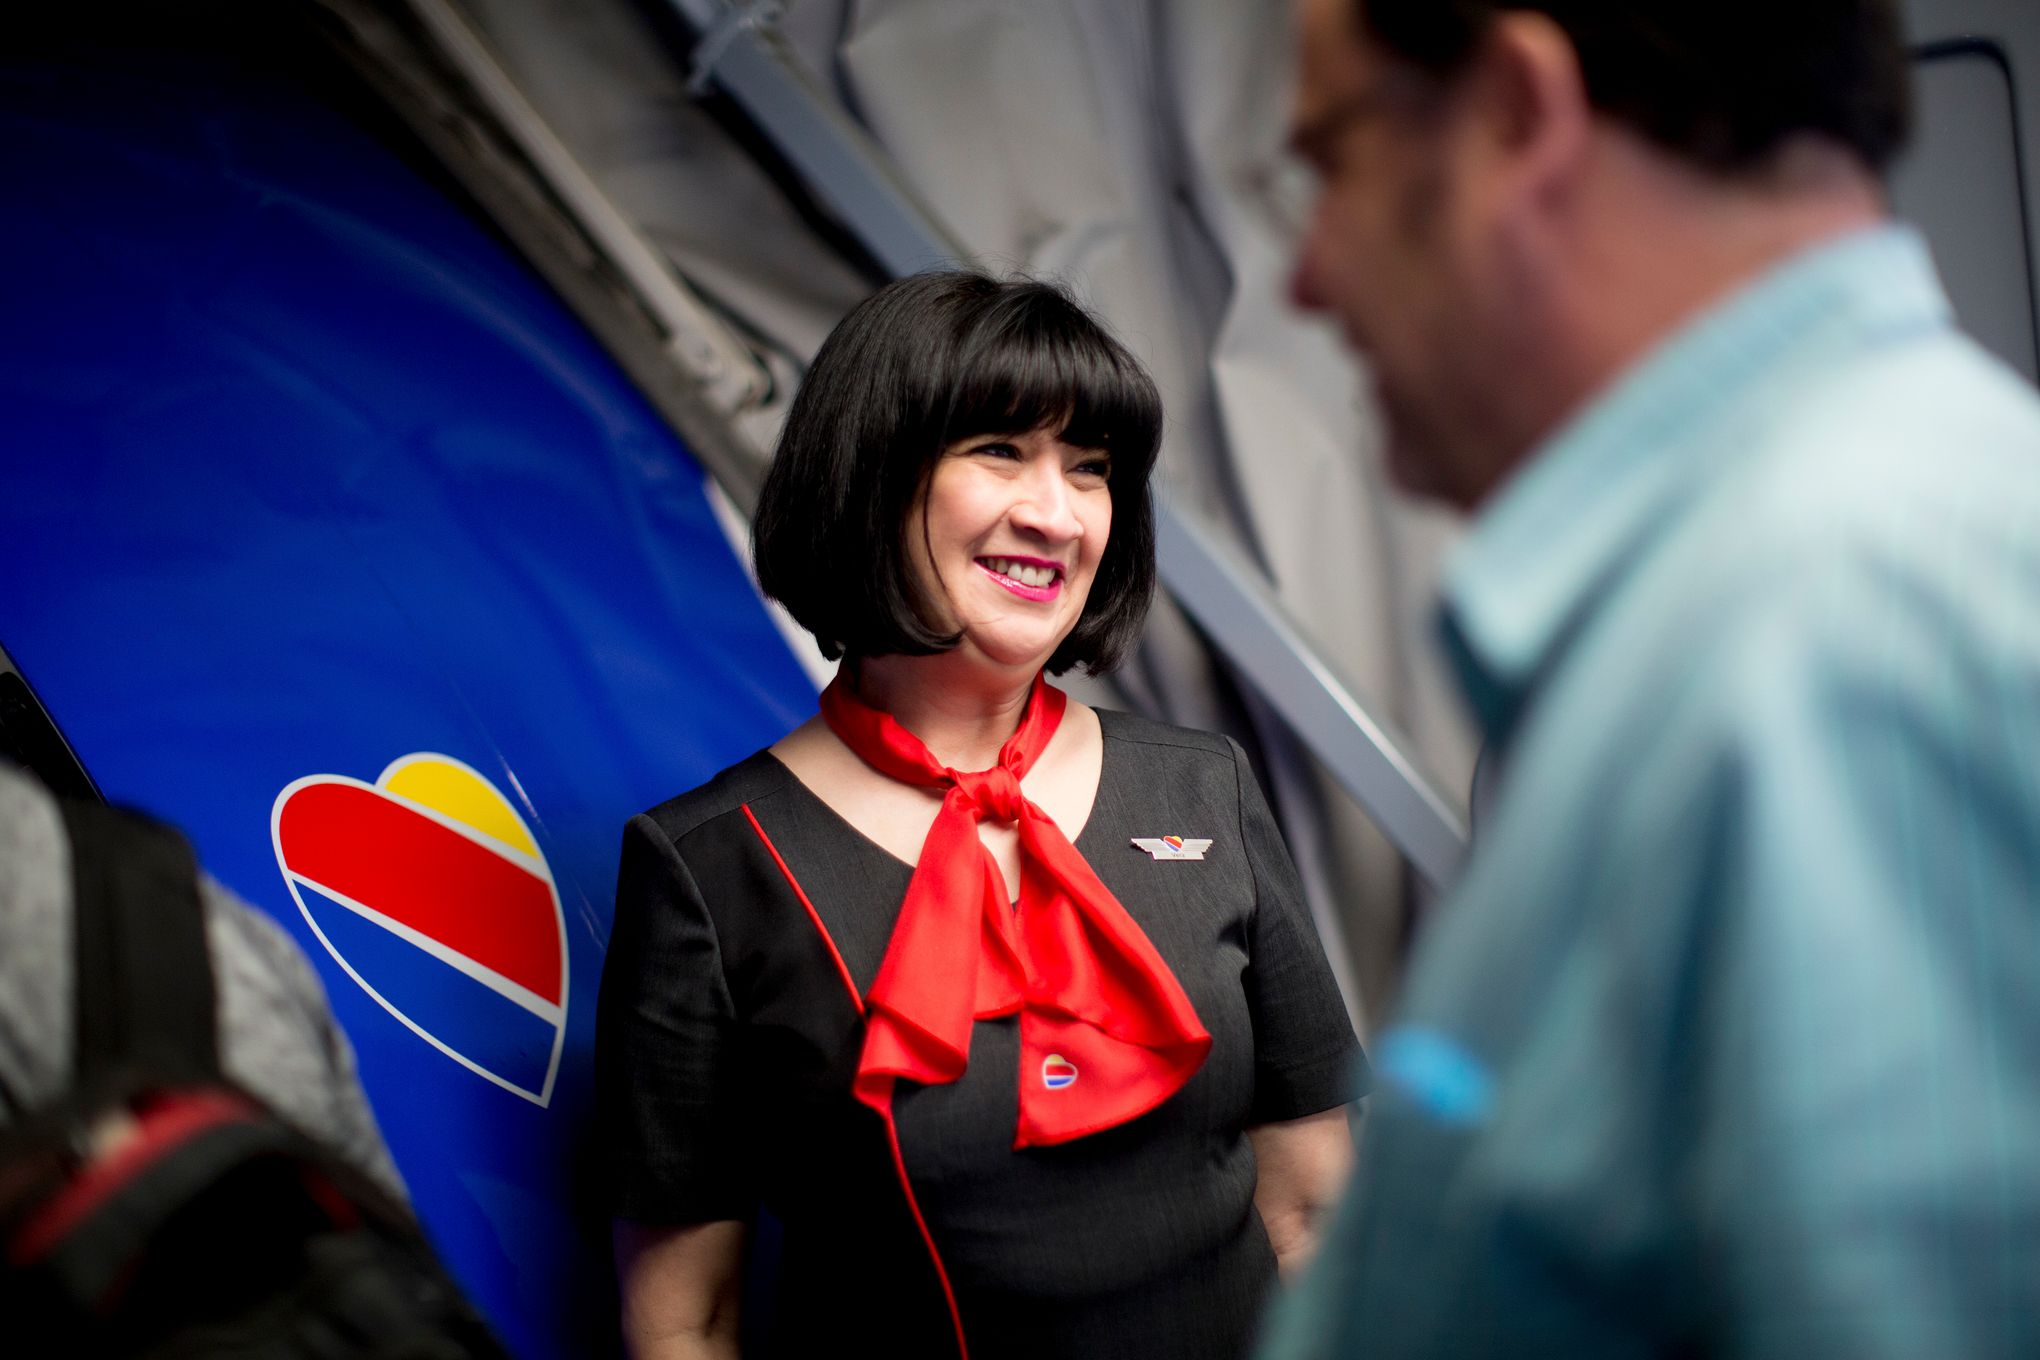 That runway look: Airlines restyle uniforms to balance style and